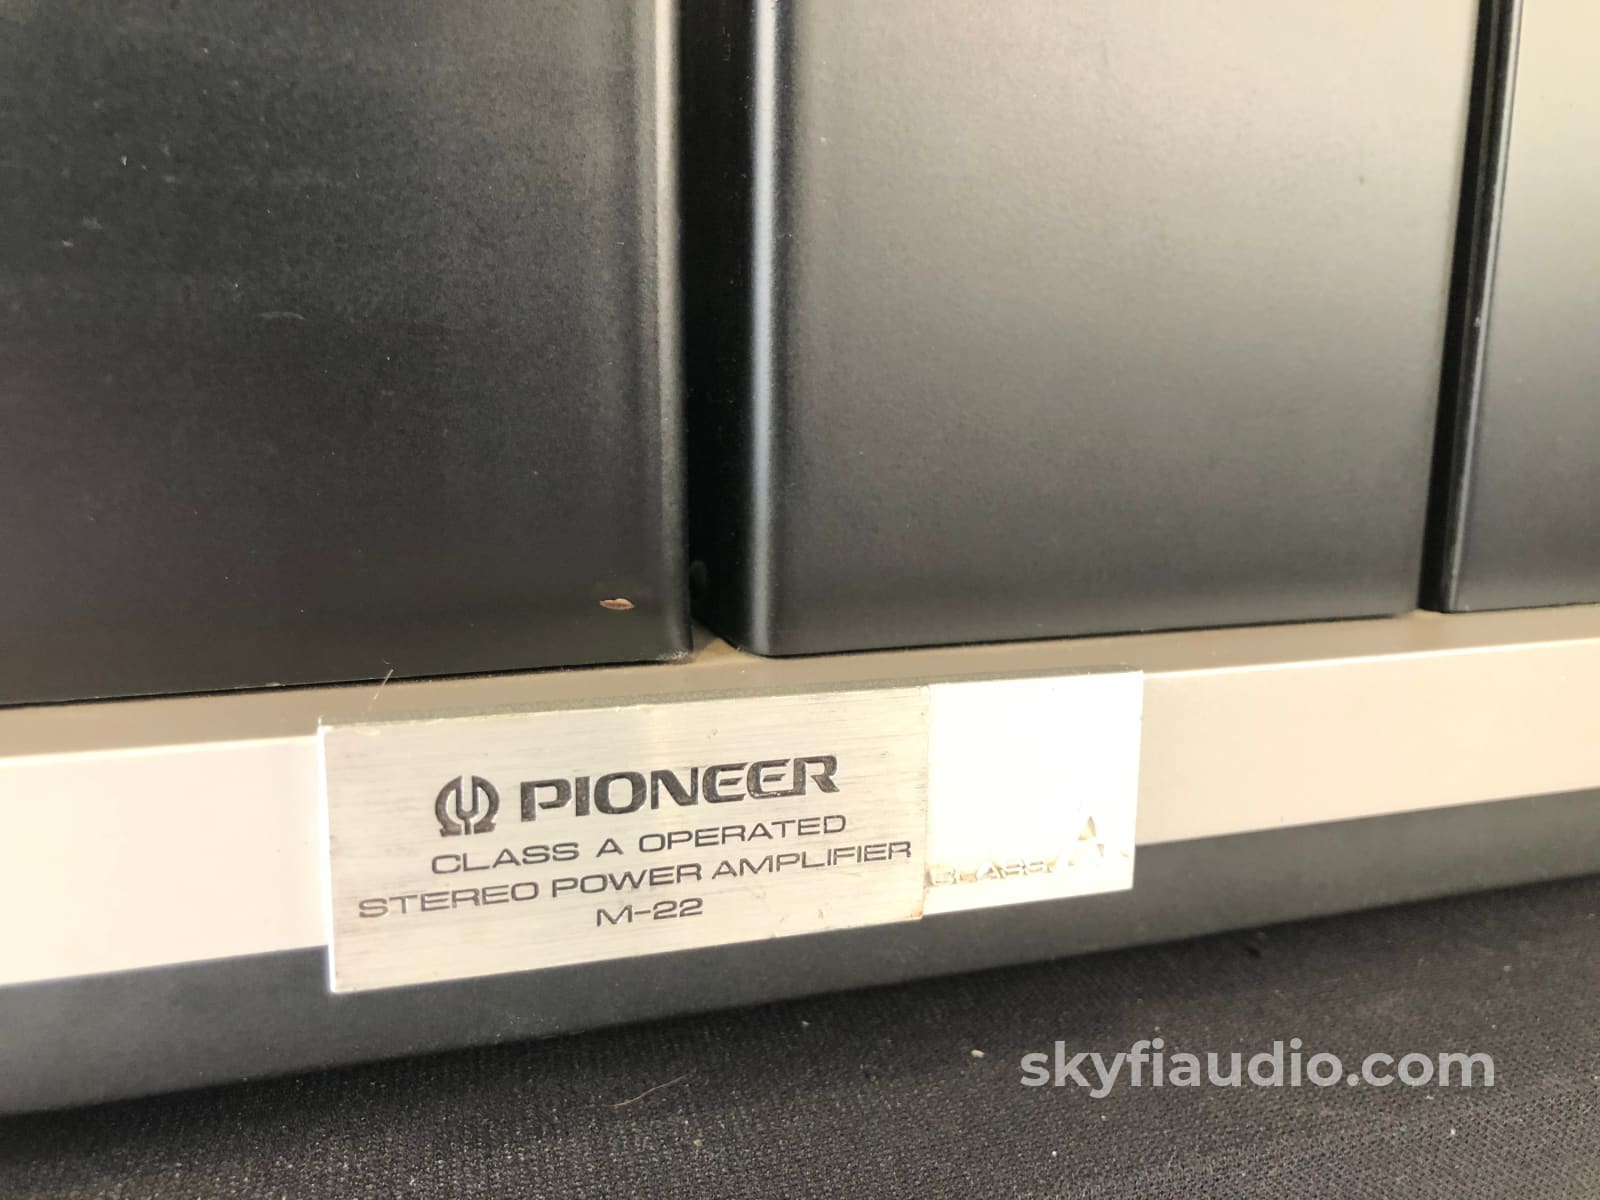 Pioneer M-22 Class A Amplifier - Unique And Classic Piece